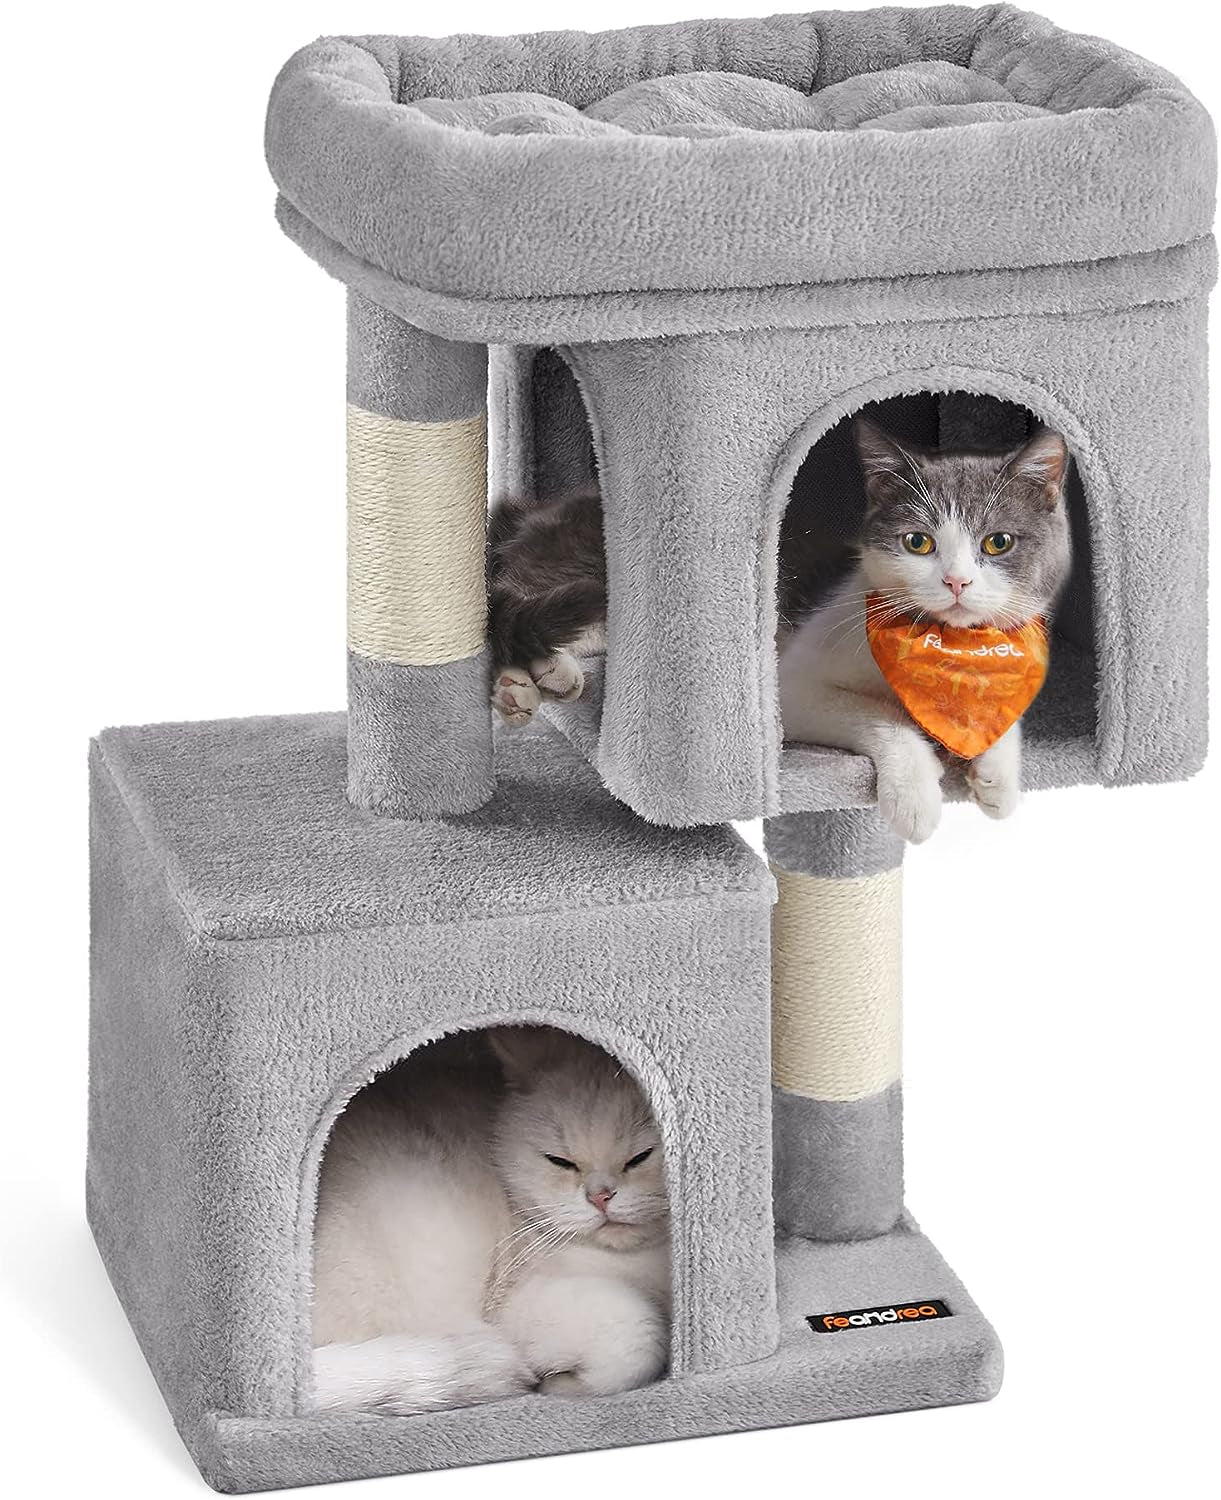 65-Inch Modern Cat Tower for Indoor Cats - Everyday-Sales.com